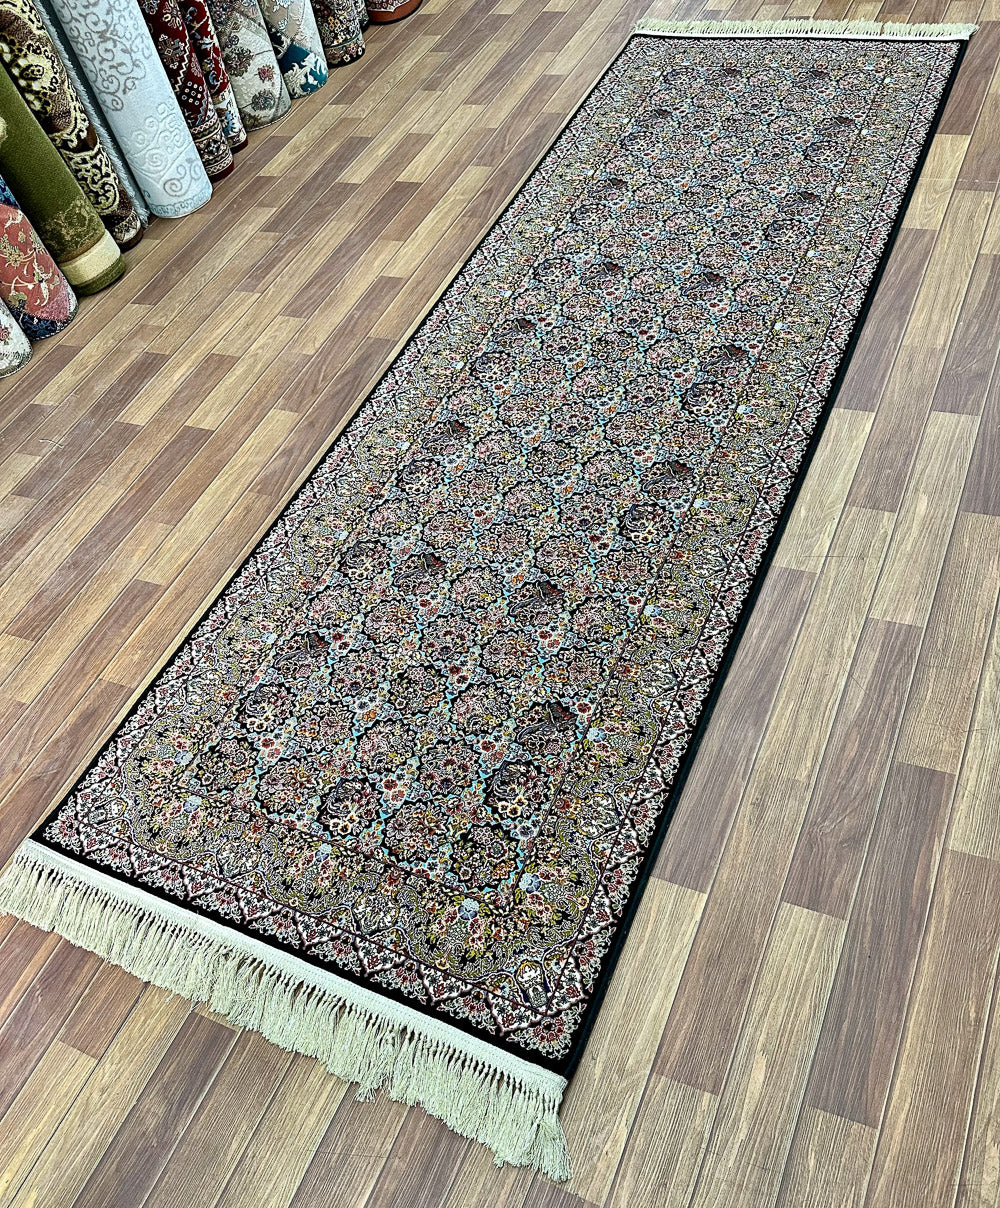 3 ft x 10 ft - Runner - Persian 1000 Reeds - Shahkar 1 - Black and tortoise with Multi Colors